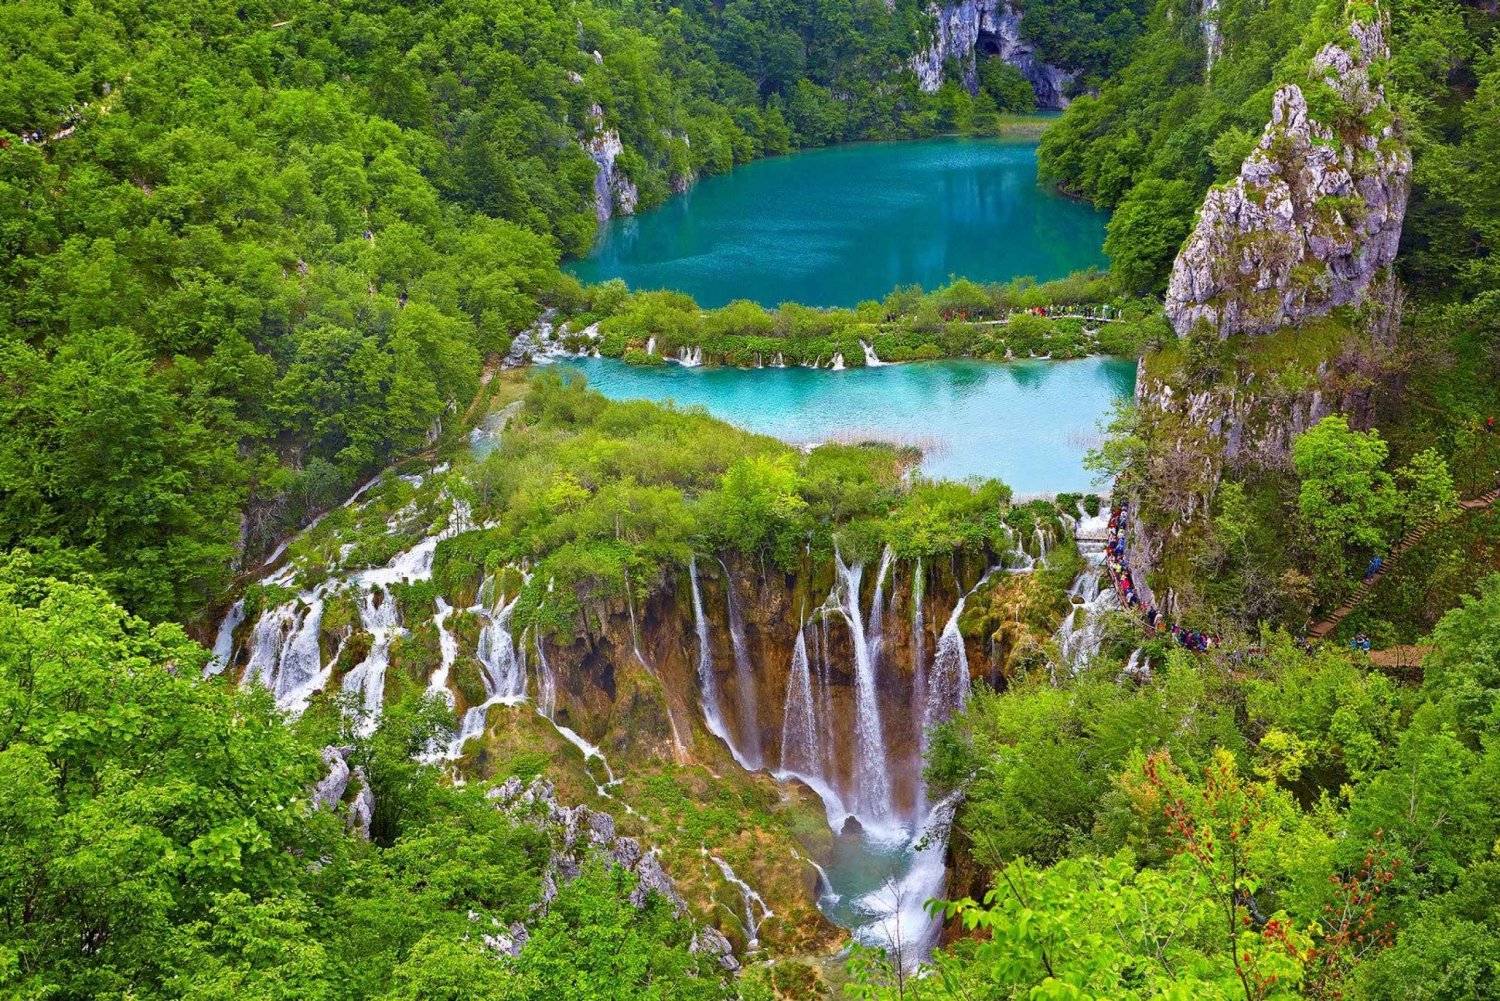 Split to/from Zagreb Transfer with Entry to Plitvice Lakes